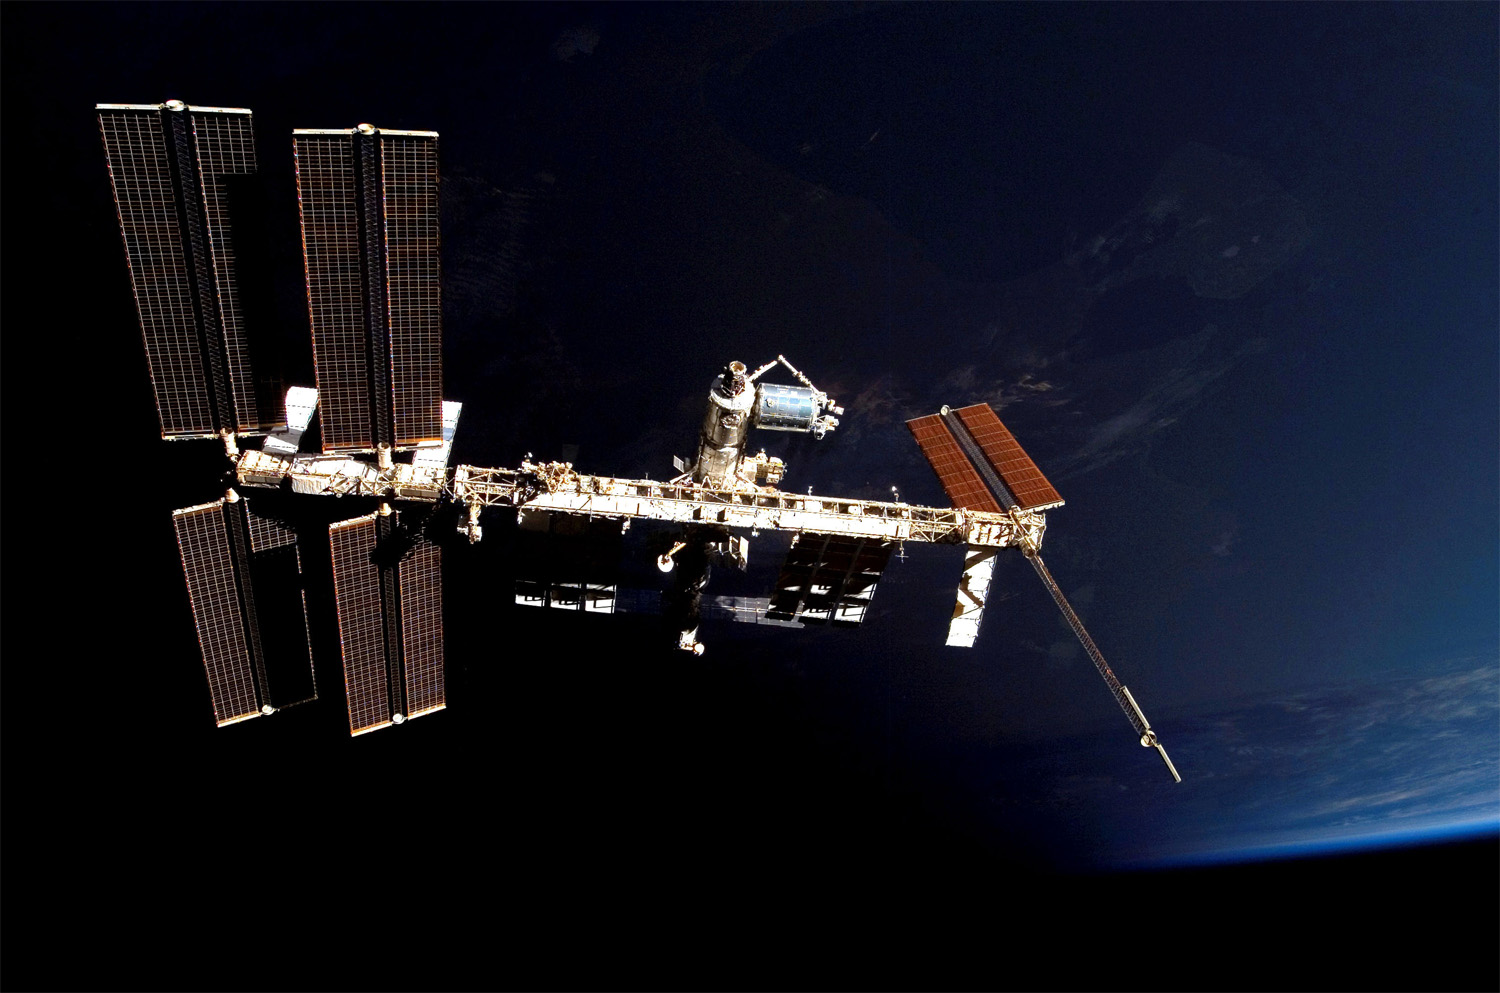 The ISS, Earth’s Ultimate Outpost, Turns 15